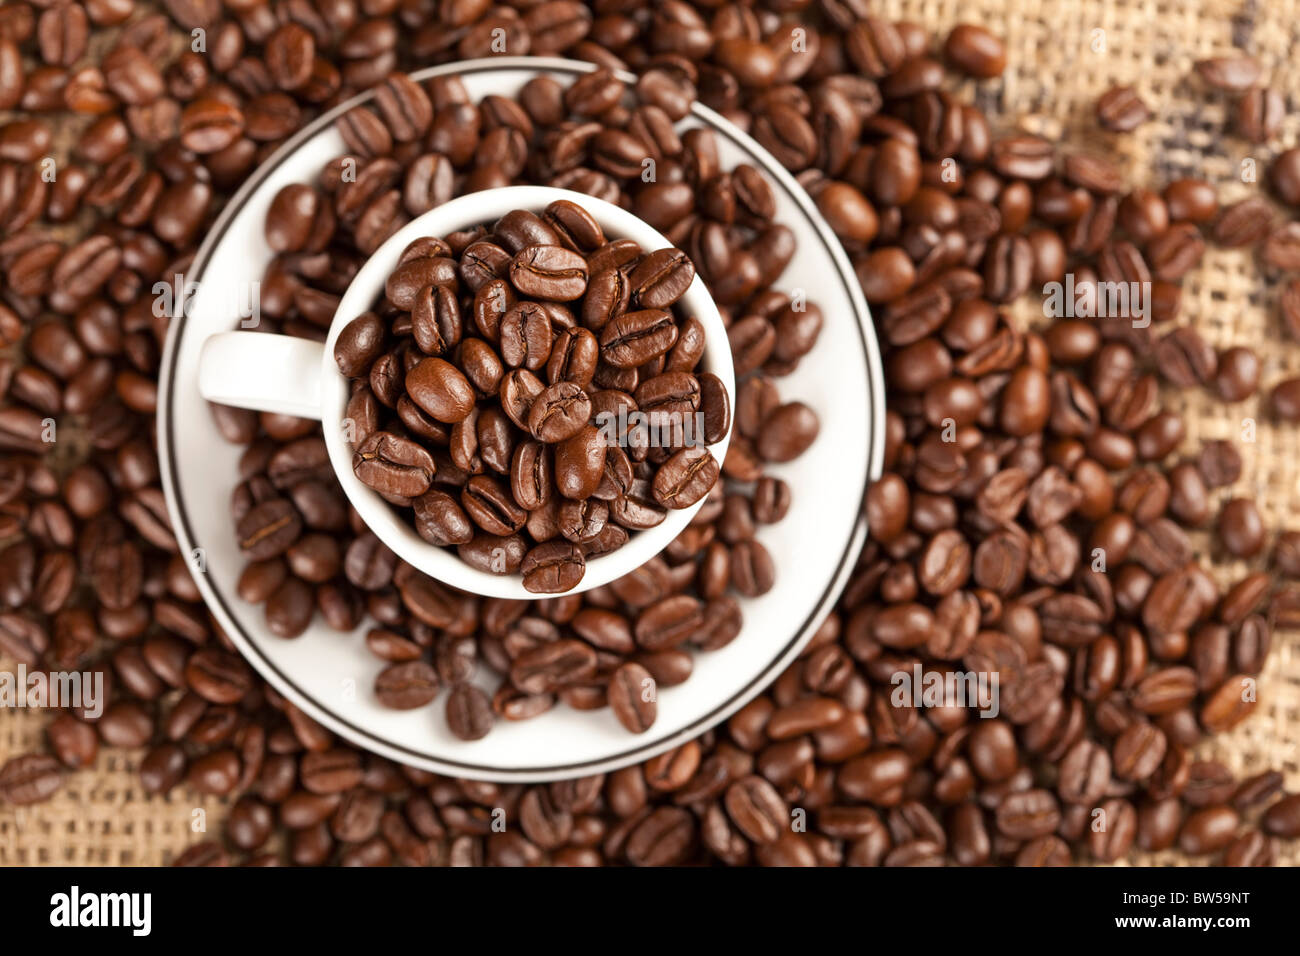 Espresso cup full with coffee beans. In background are more coffee beans visible. Stock Photo